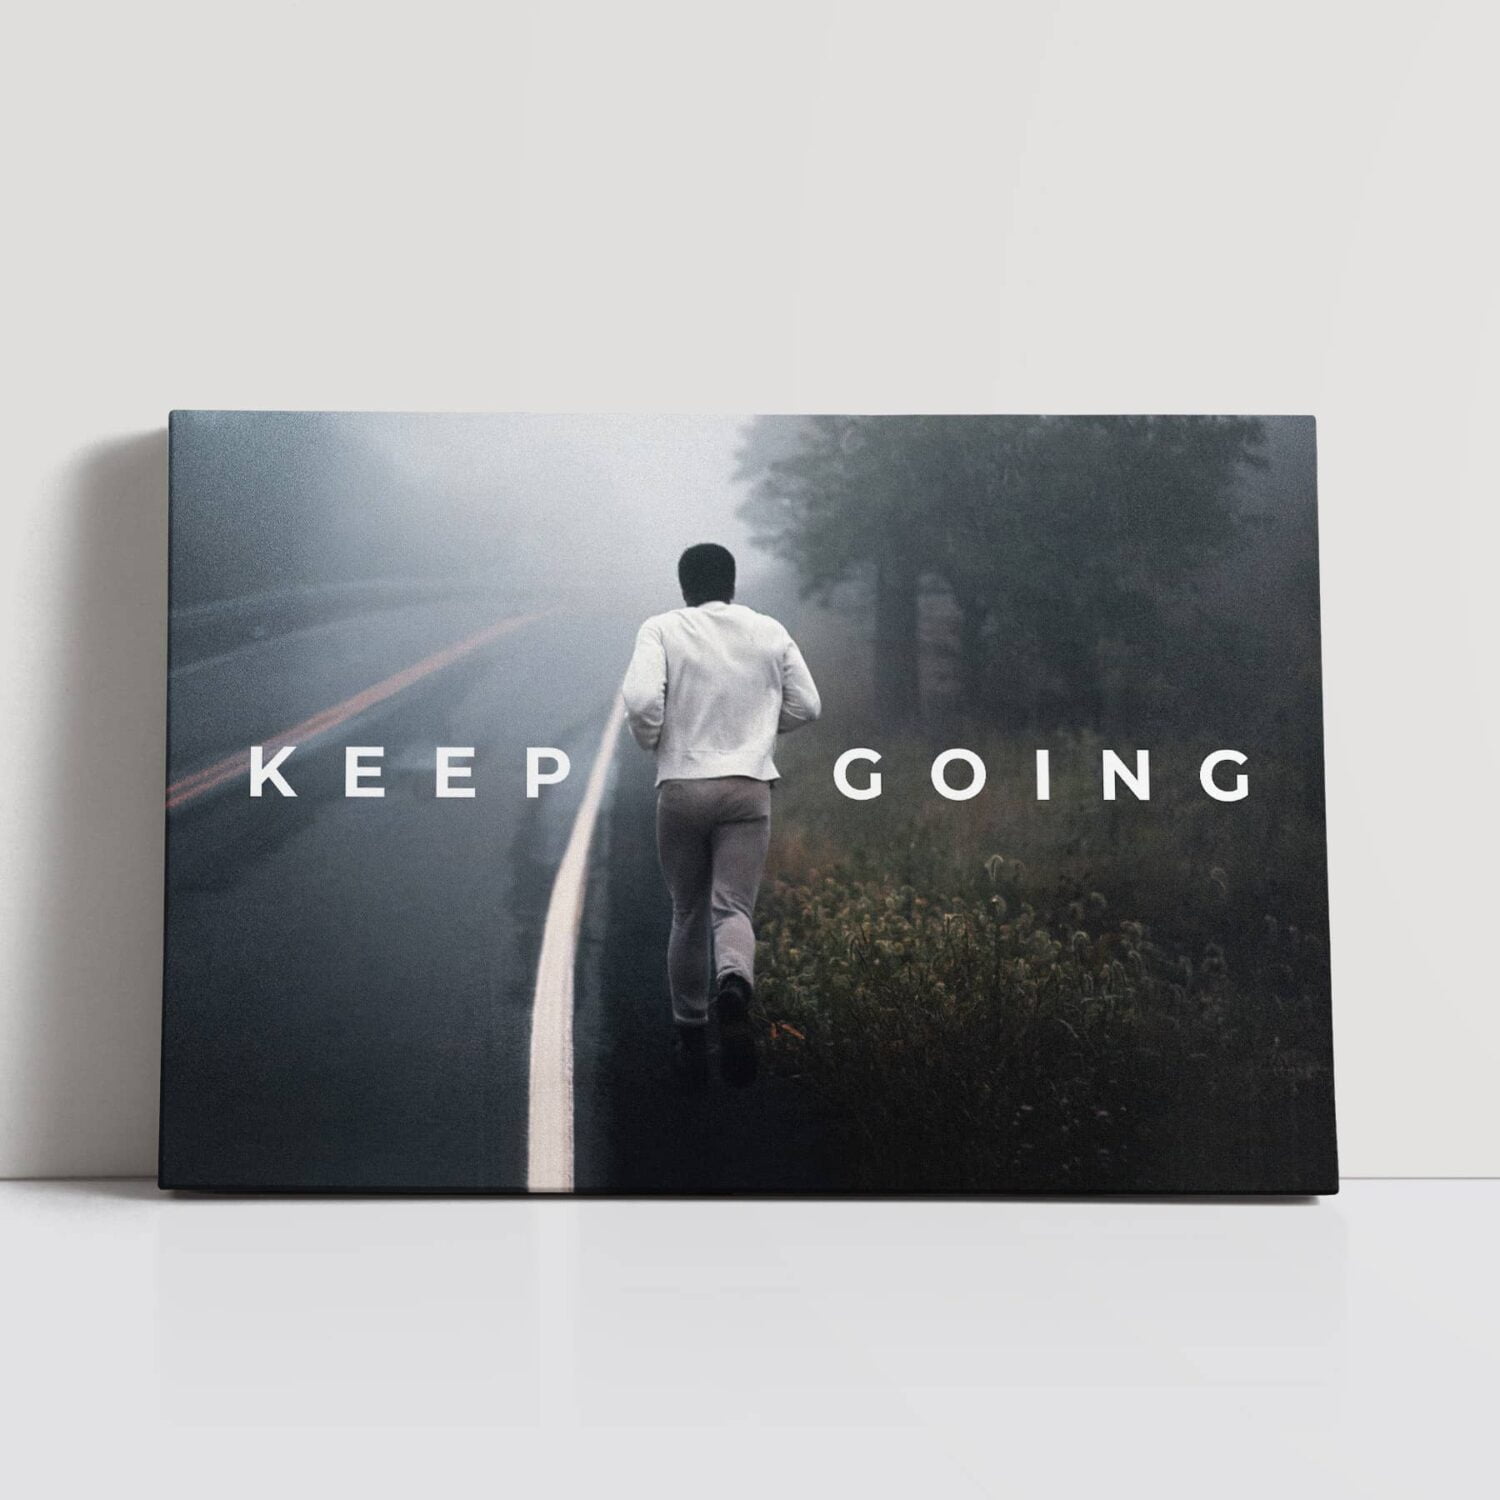 Muhammad Ali canvas featuring the legendary boxer out jogging and the quote "Keep Going".